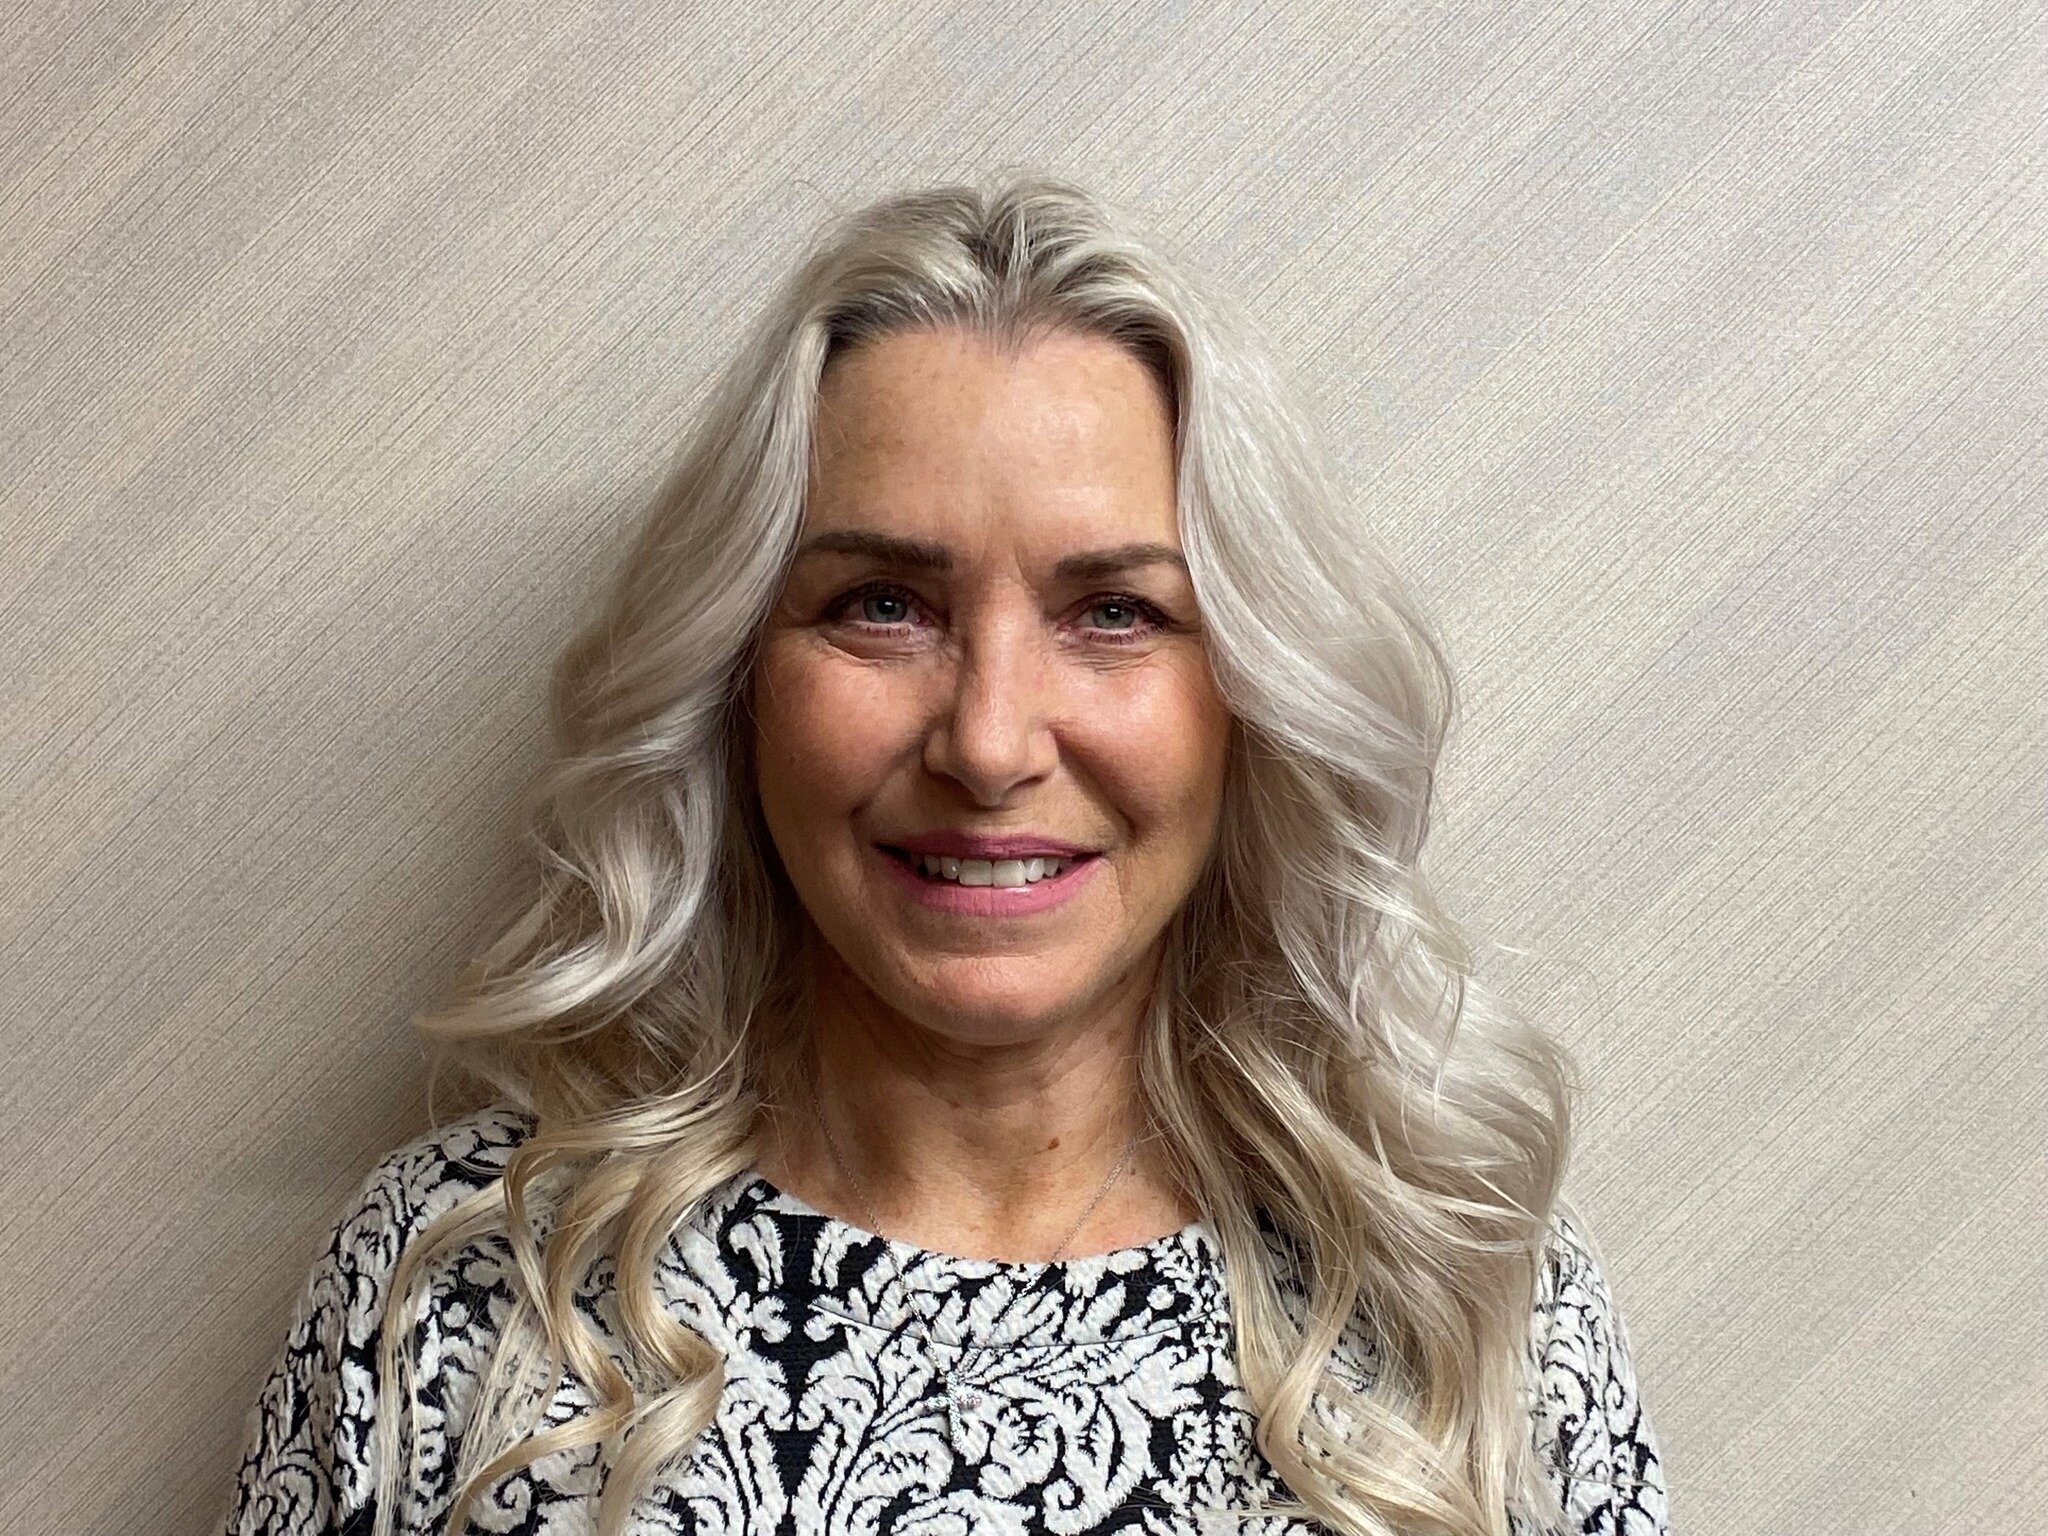 This week we have a new team member for Administration at Frederick.  Crystal Wilkinson started as an Executive Assistant and will be replacing Melissa Powell who has been with us for over 14 years of dedicated service. Crystal comes to Willard with 